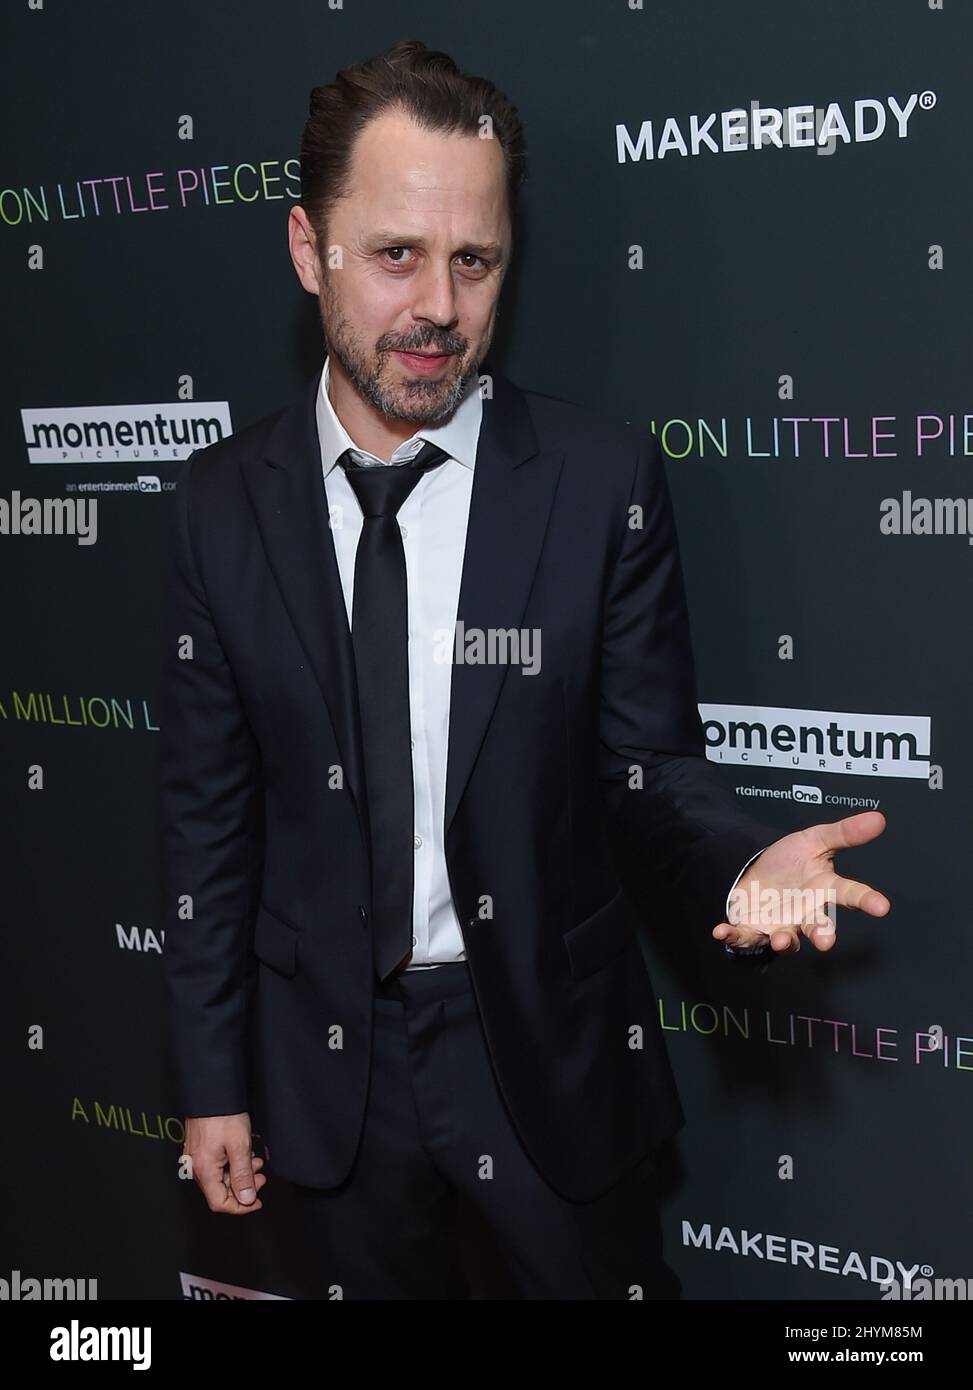 Giovanni Ribisi attending a special screening of A Million Little Pieces in Los Angeles Stock Photo